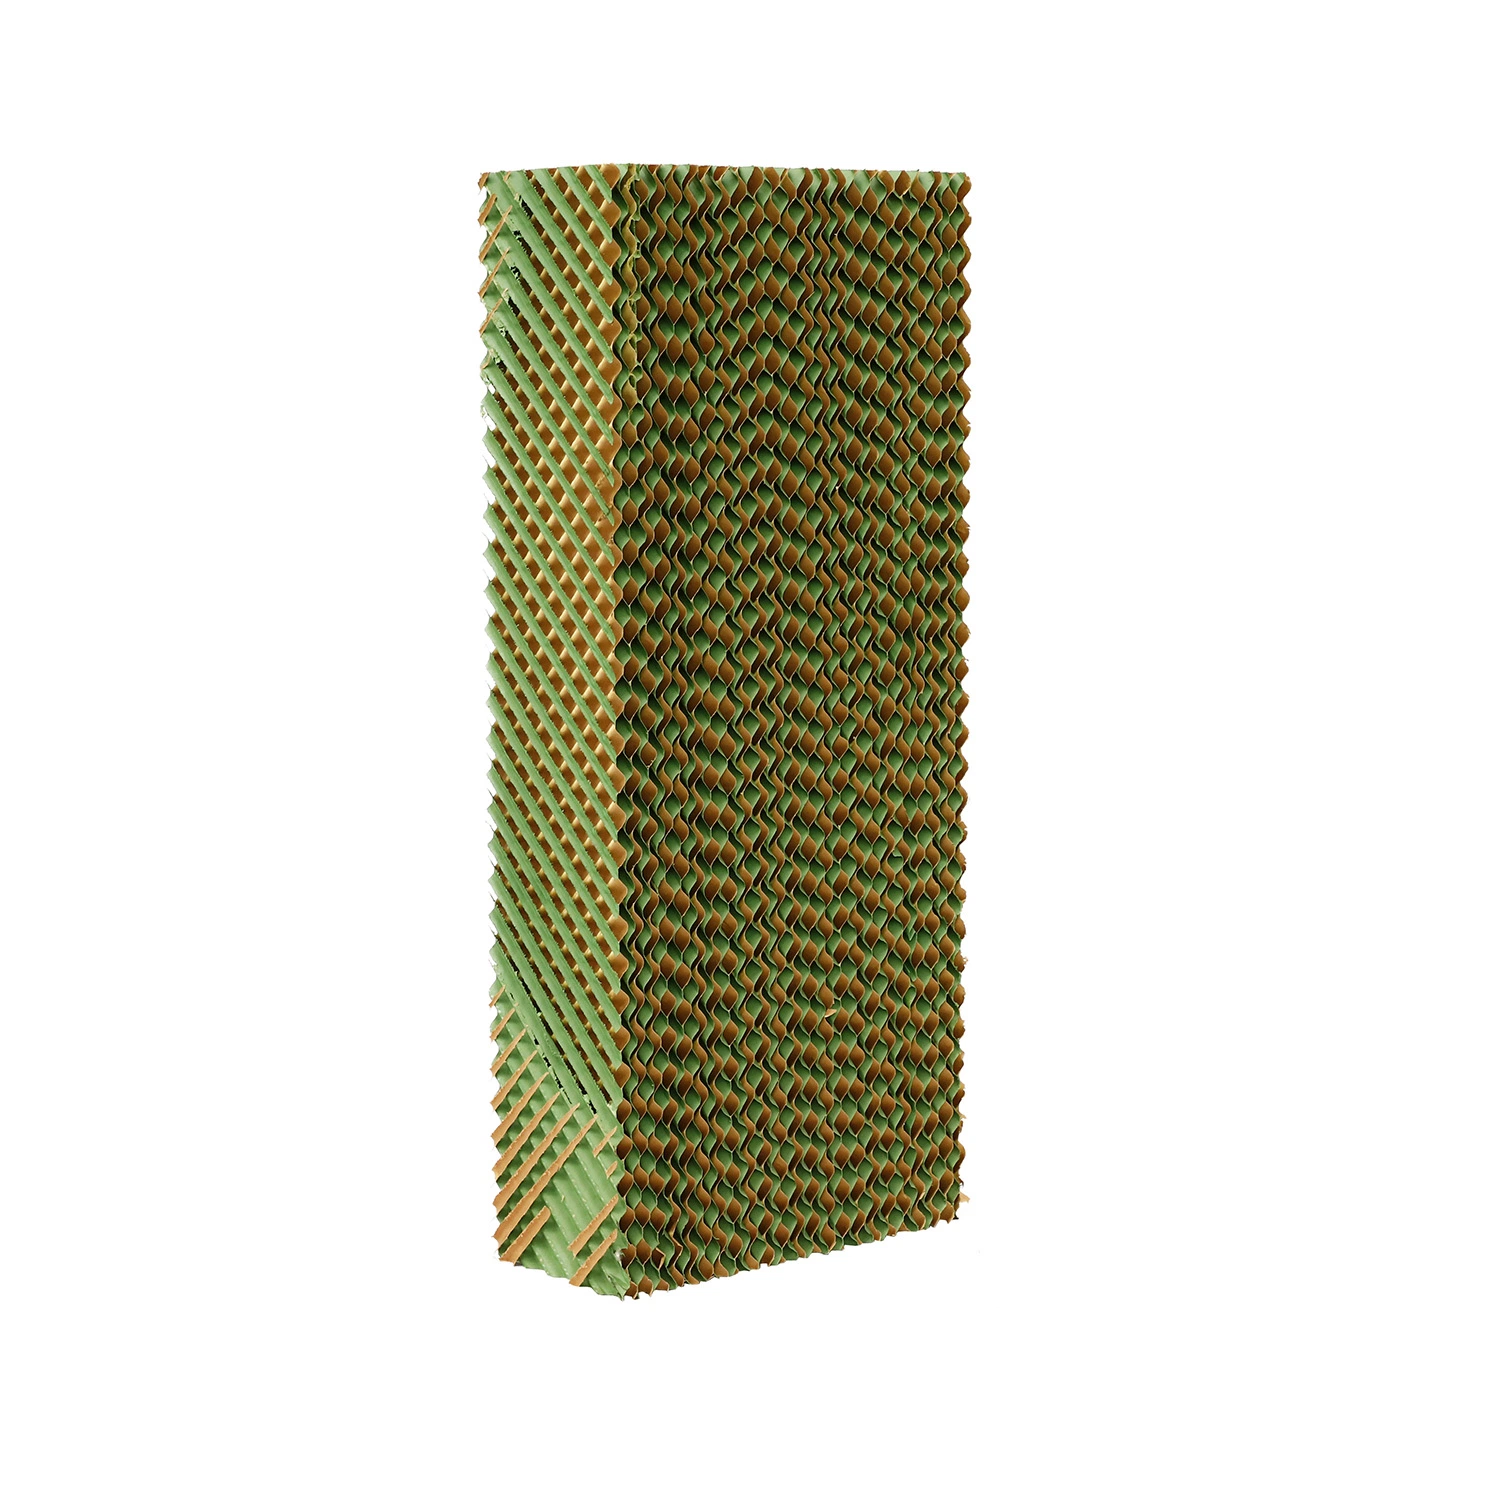 Brown/Green/Black Coating /Yellow/Evaporative Honey Comb Cooling Pad/Greenhouse/Poultry Equipment /Chicken House/Industrial Workshop /Evaporative Air Cooler